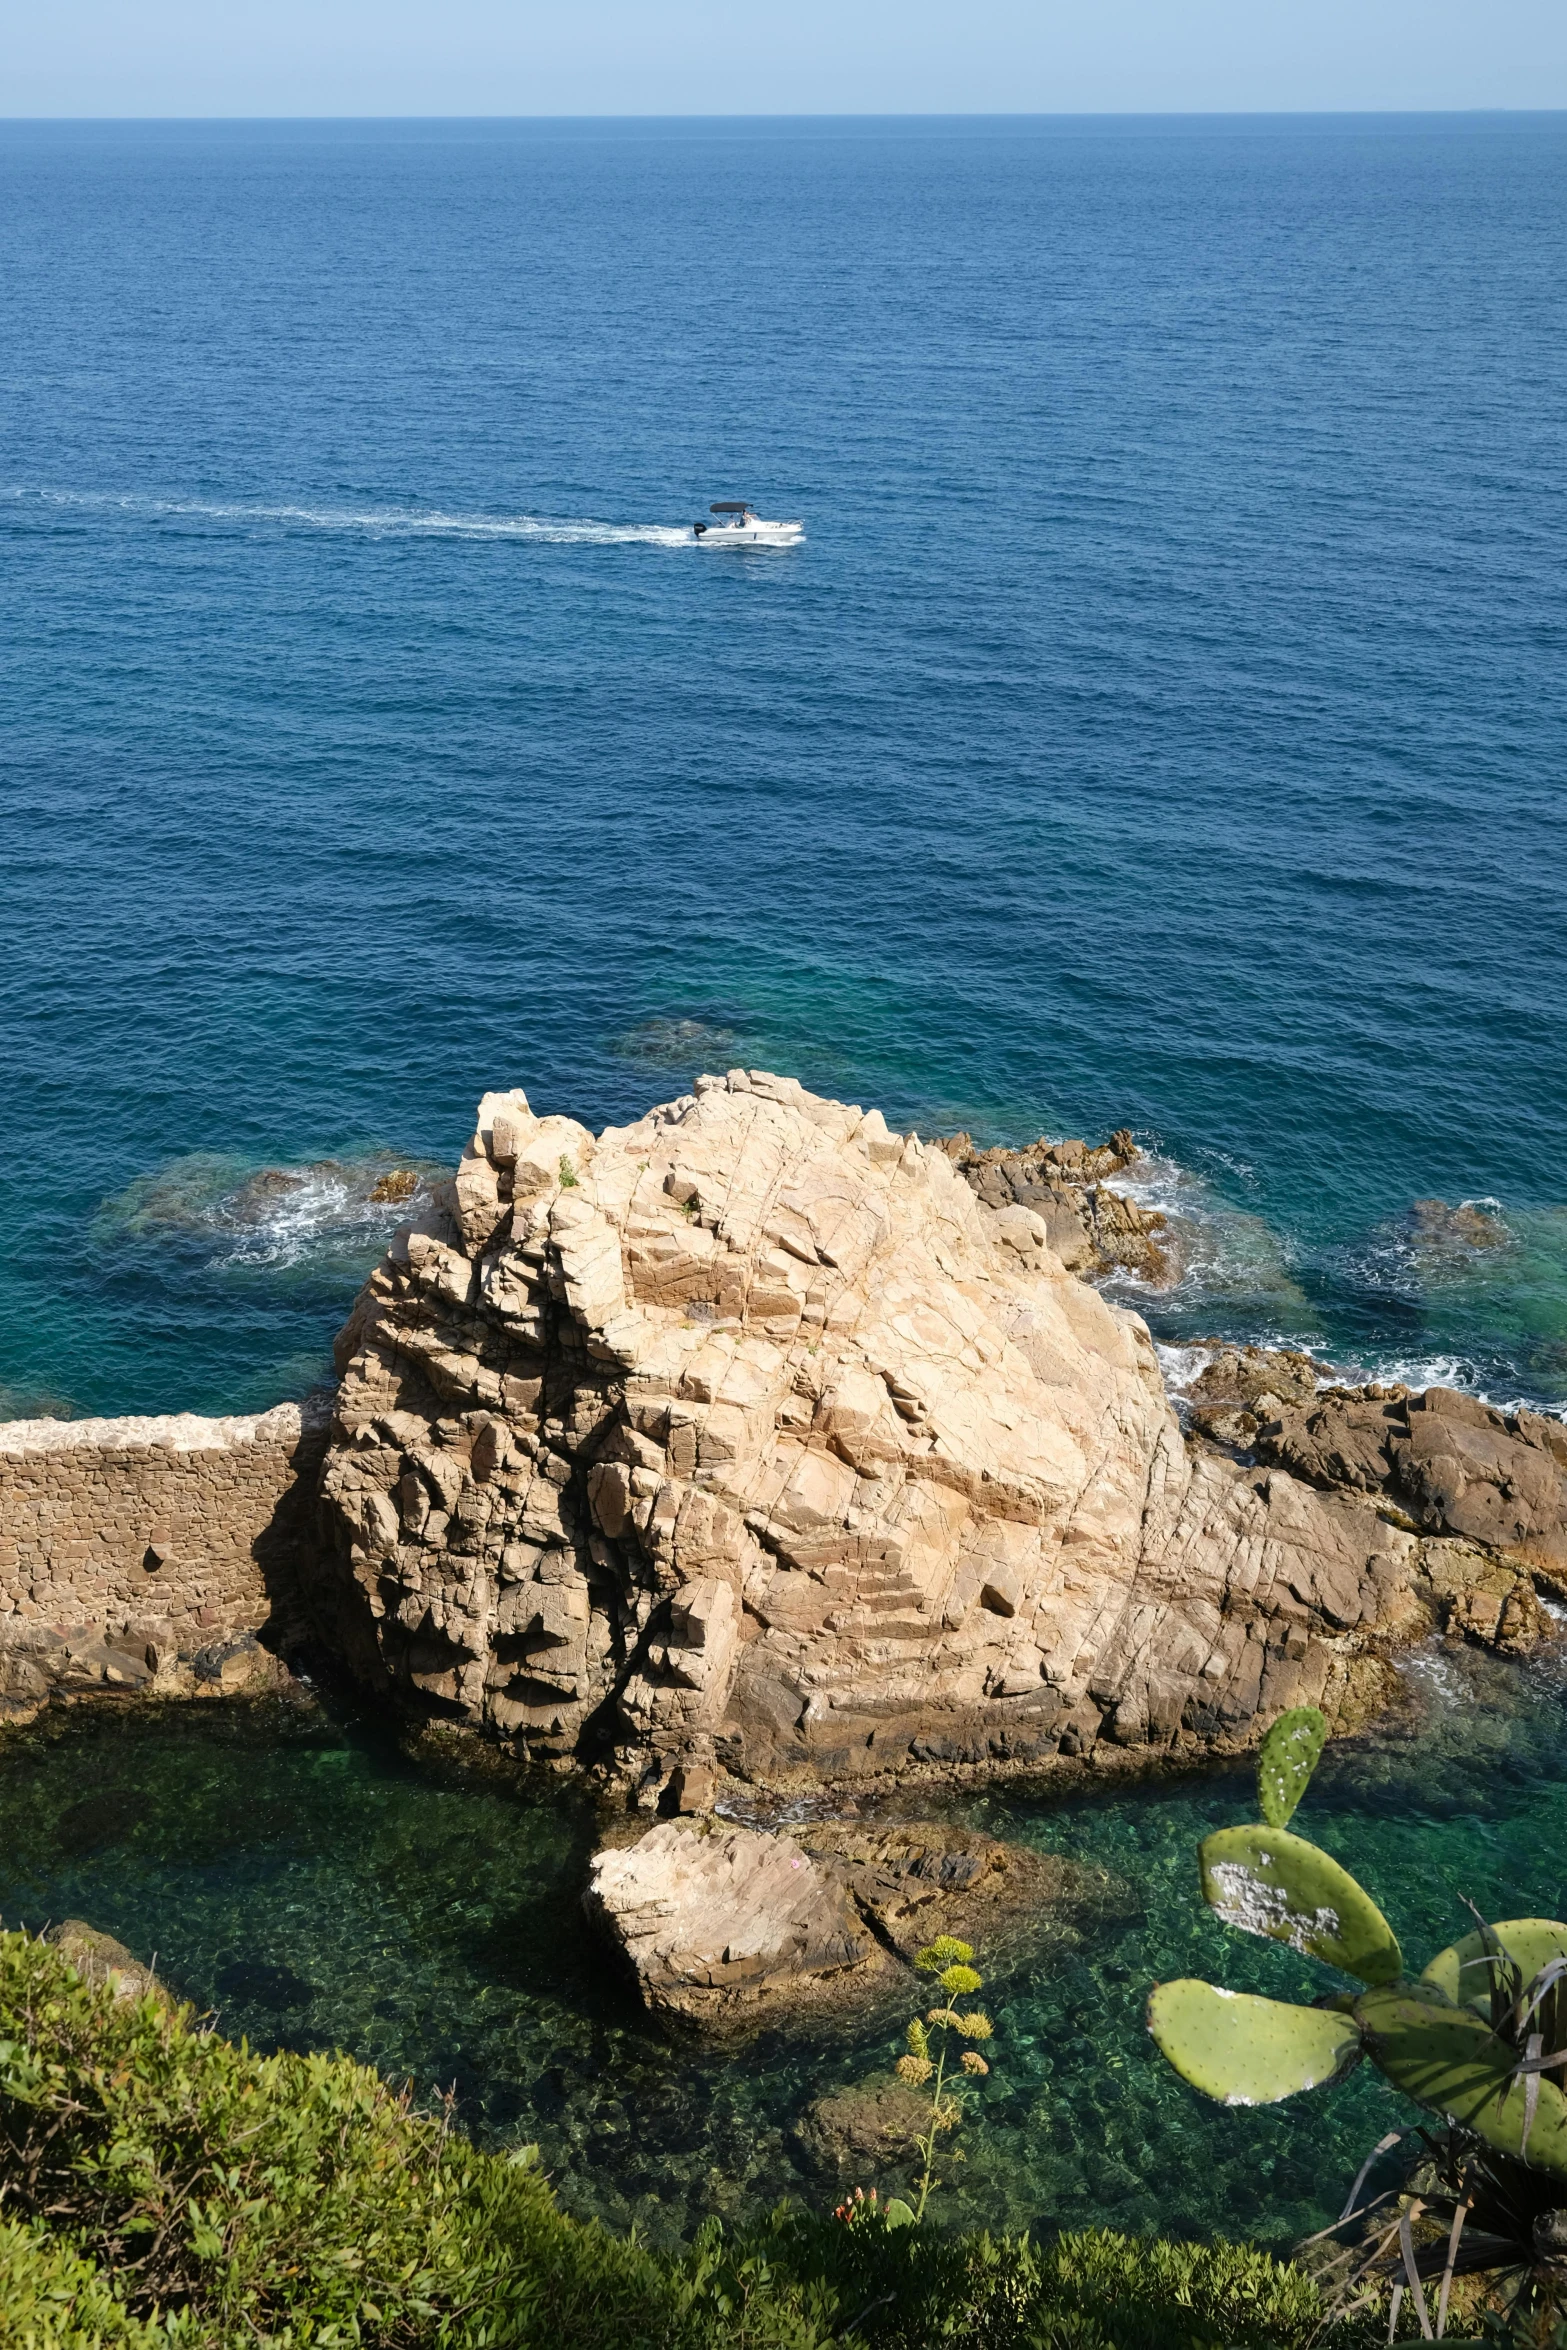 a large rock in the middle of a body of water, les nabis, overlooking the ocean, cannes, slide show, overview